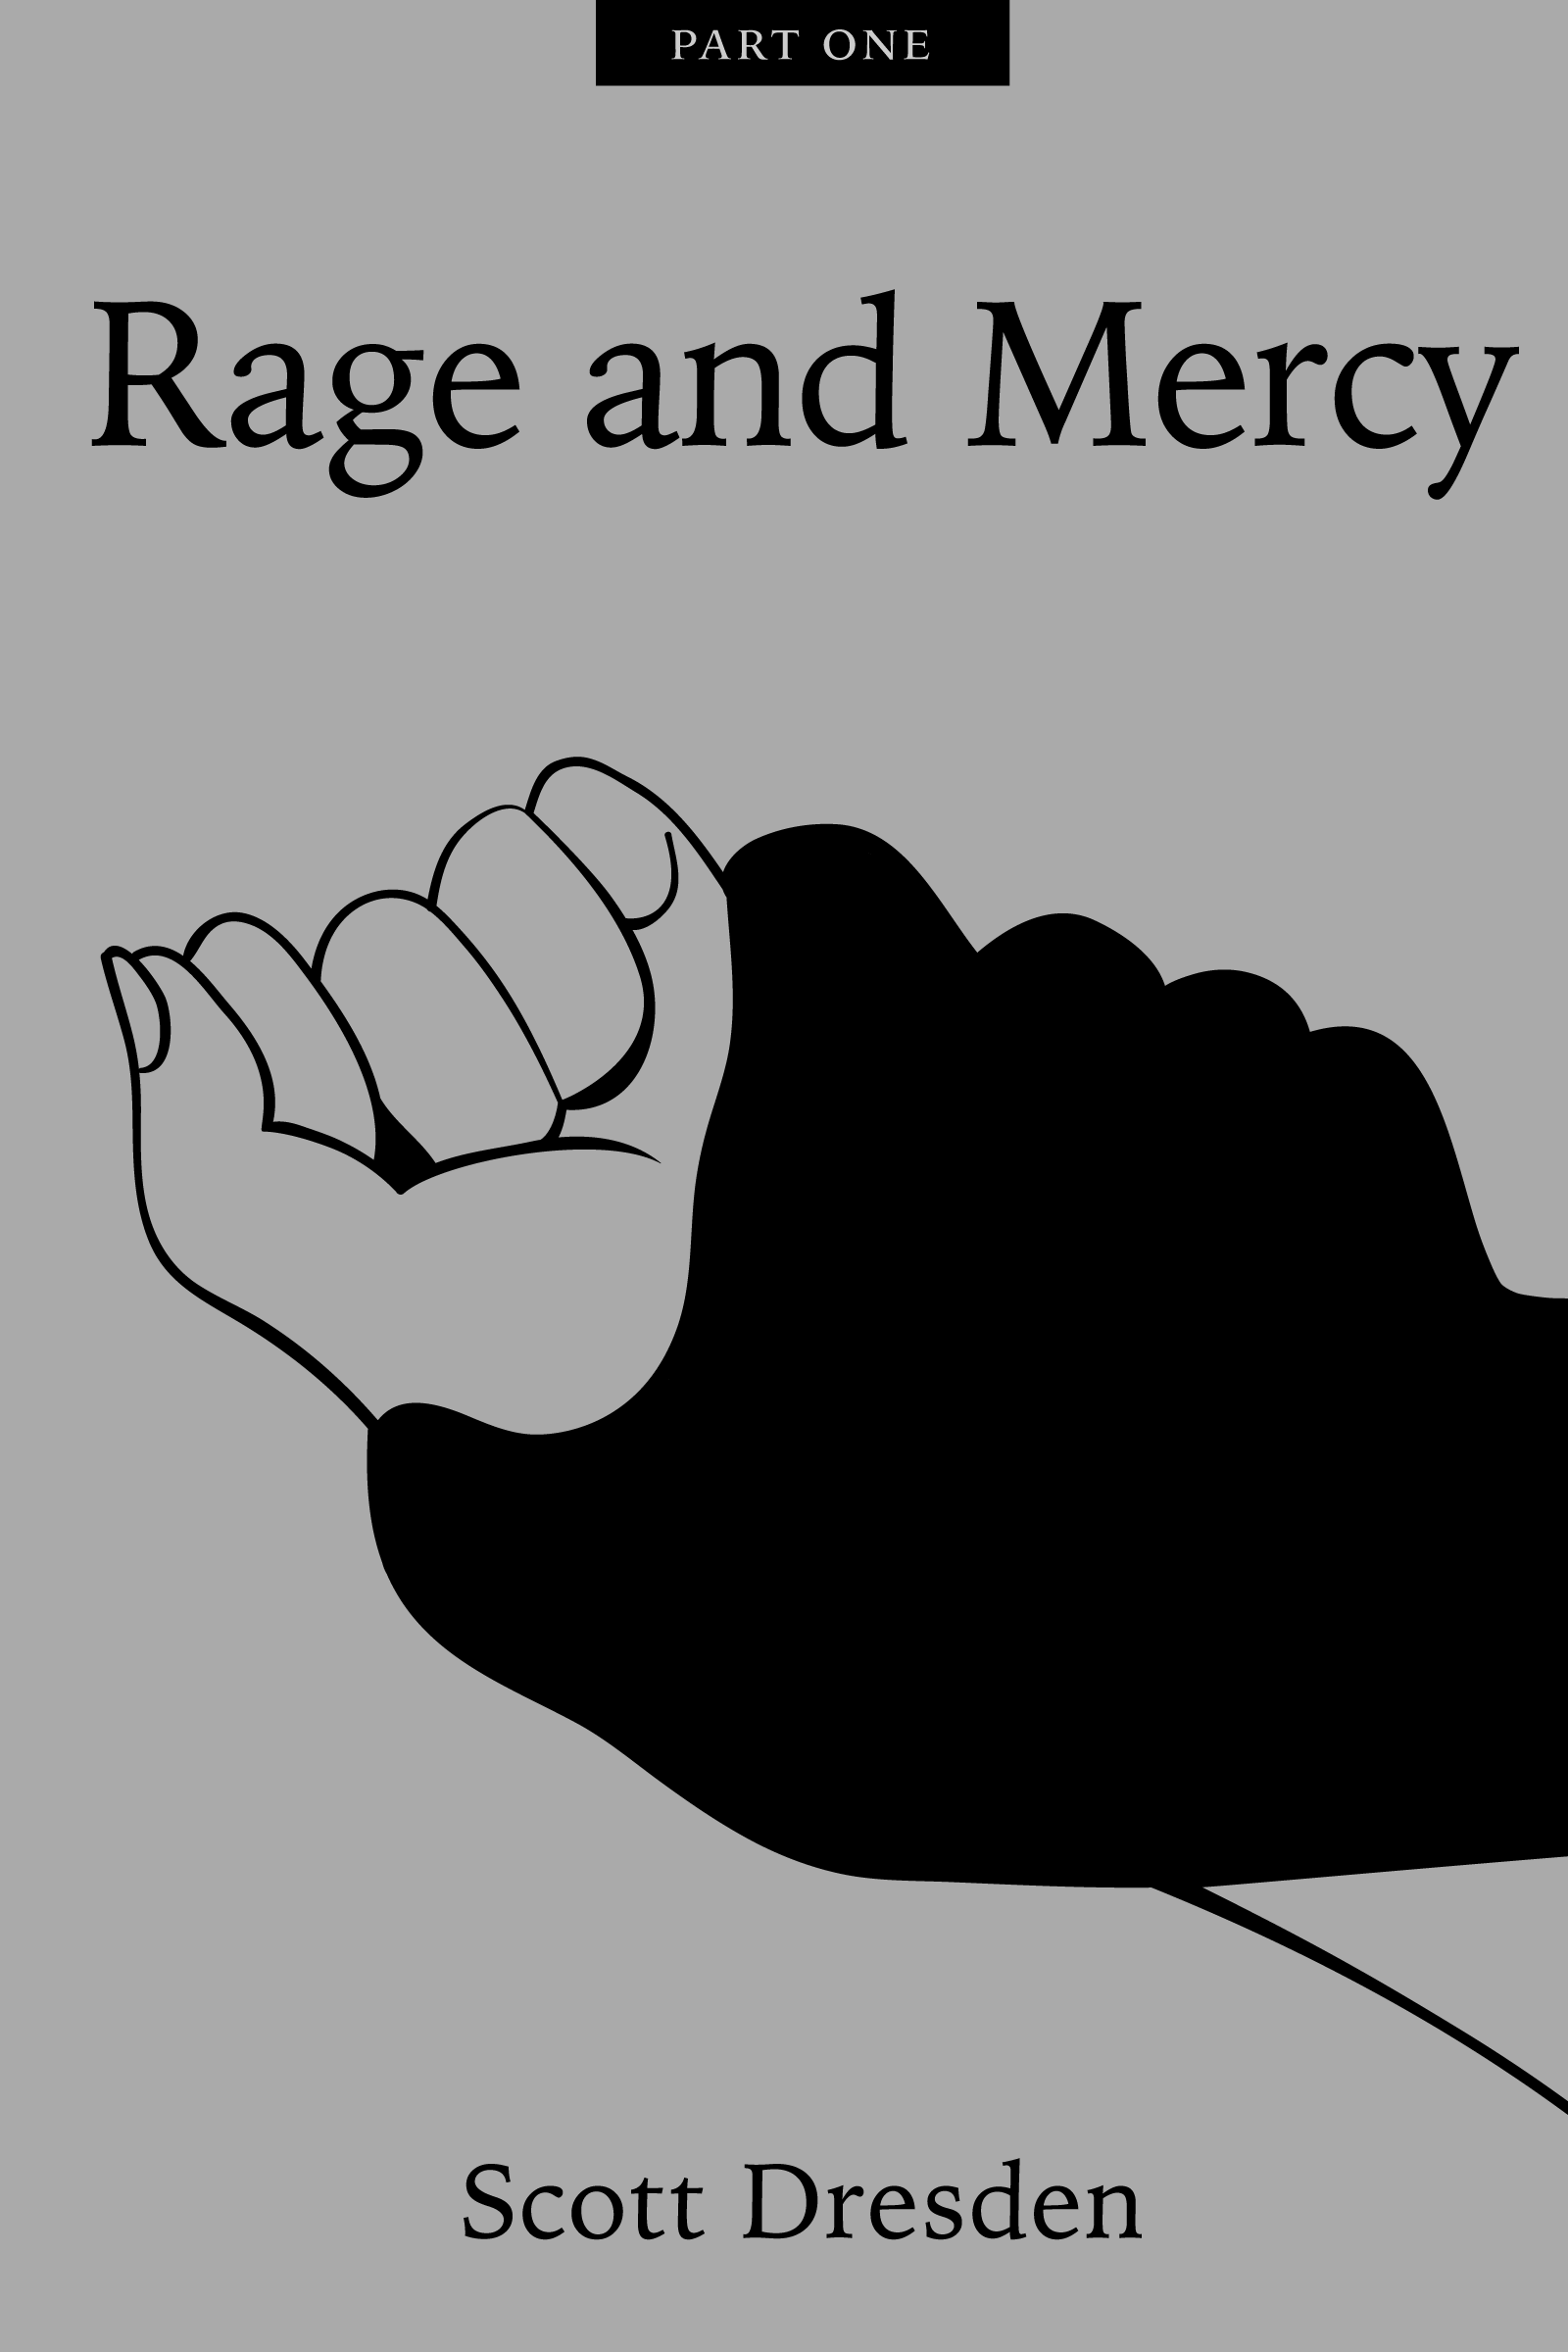 Rage and Mercy: Part One by Scott Dresden